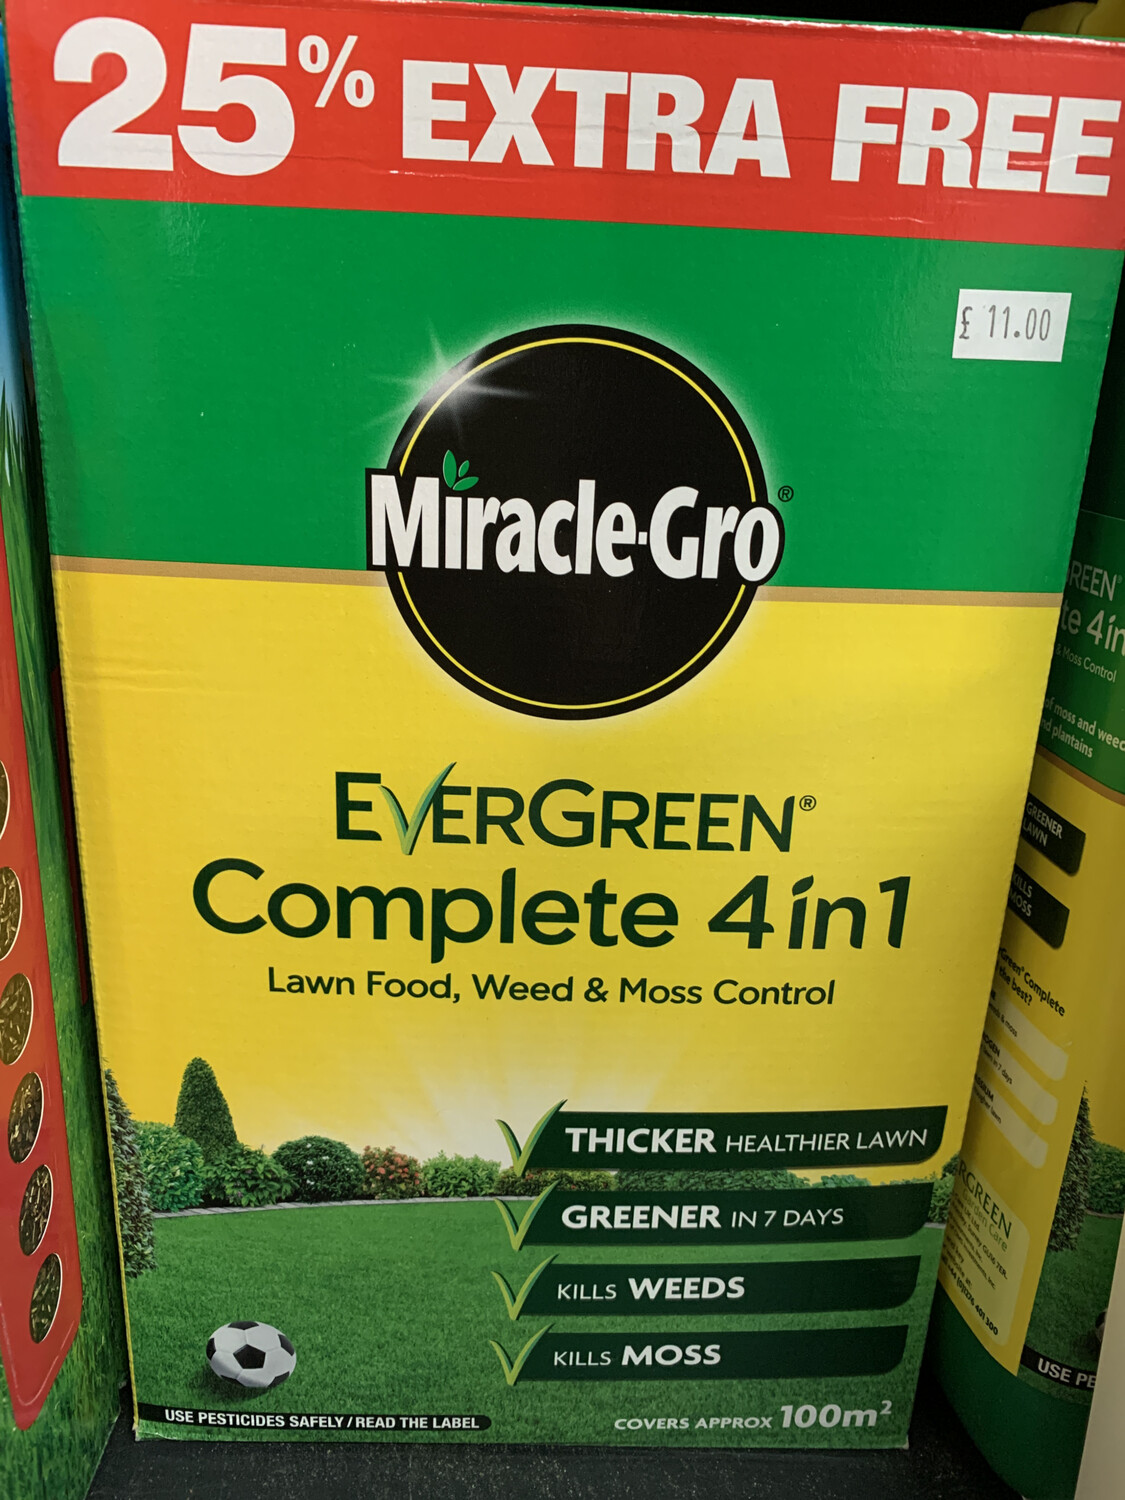 Evergreen complete 4 in 1 Lawcare